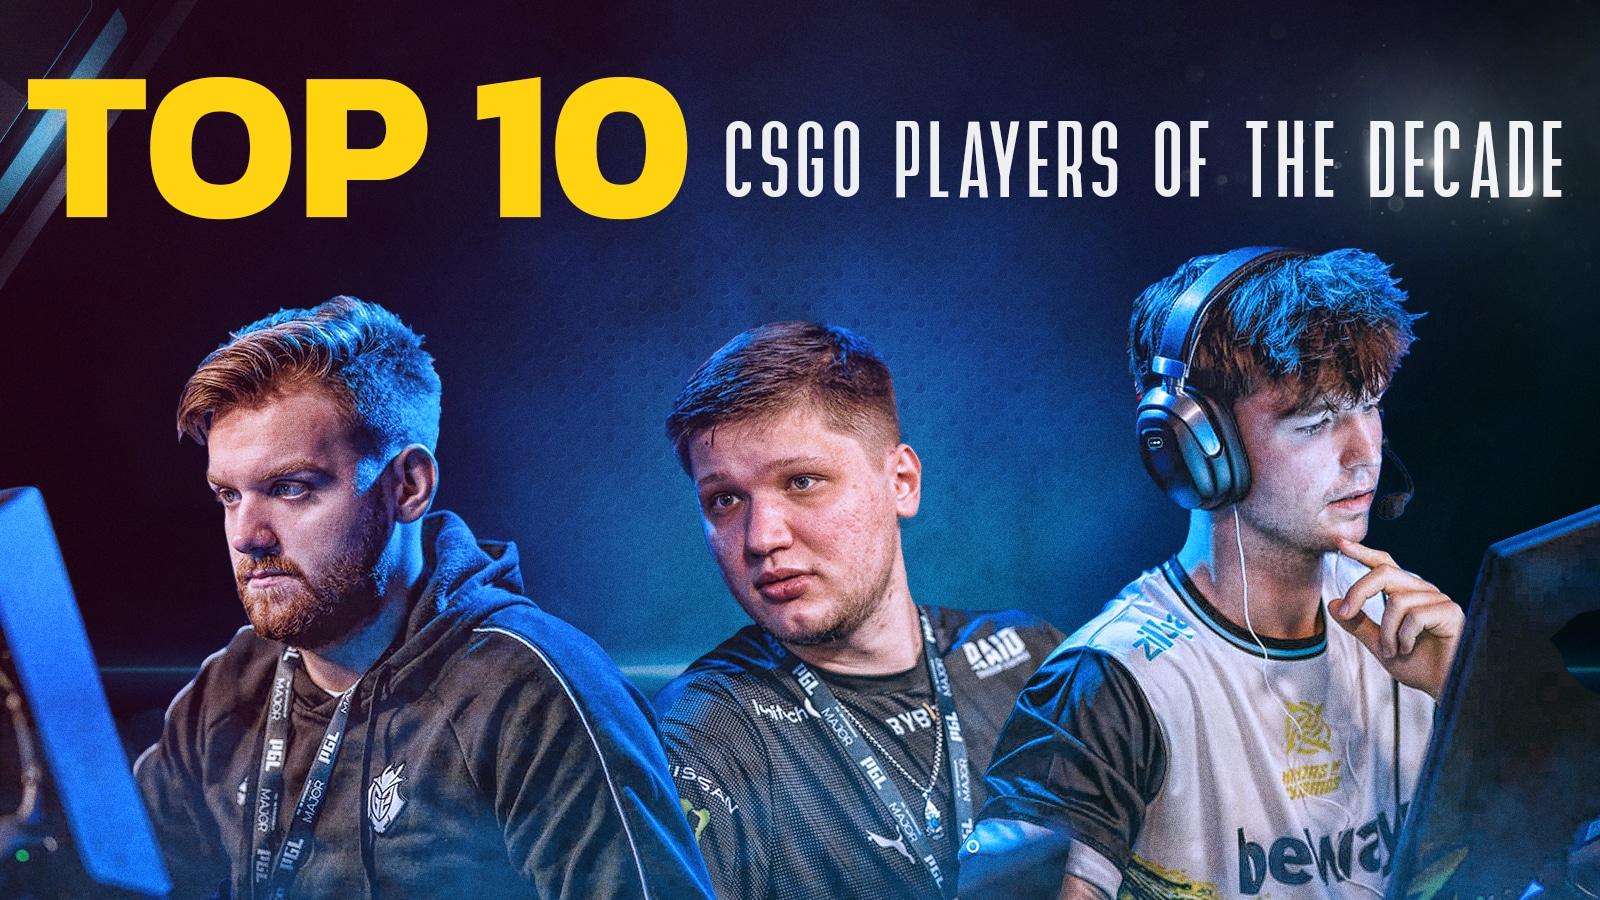 HLTV.org - First of many Top 20 awards have been finally